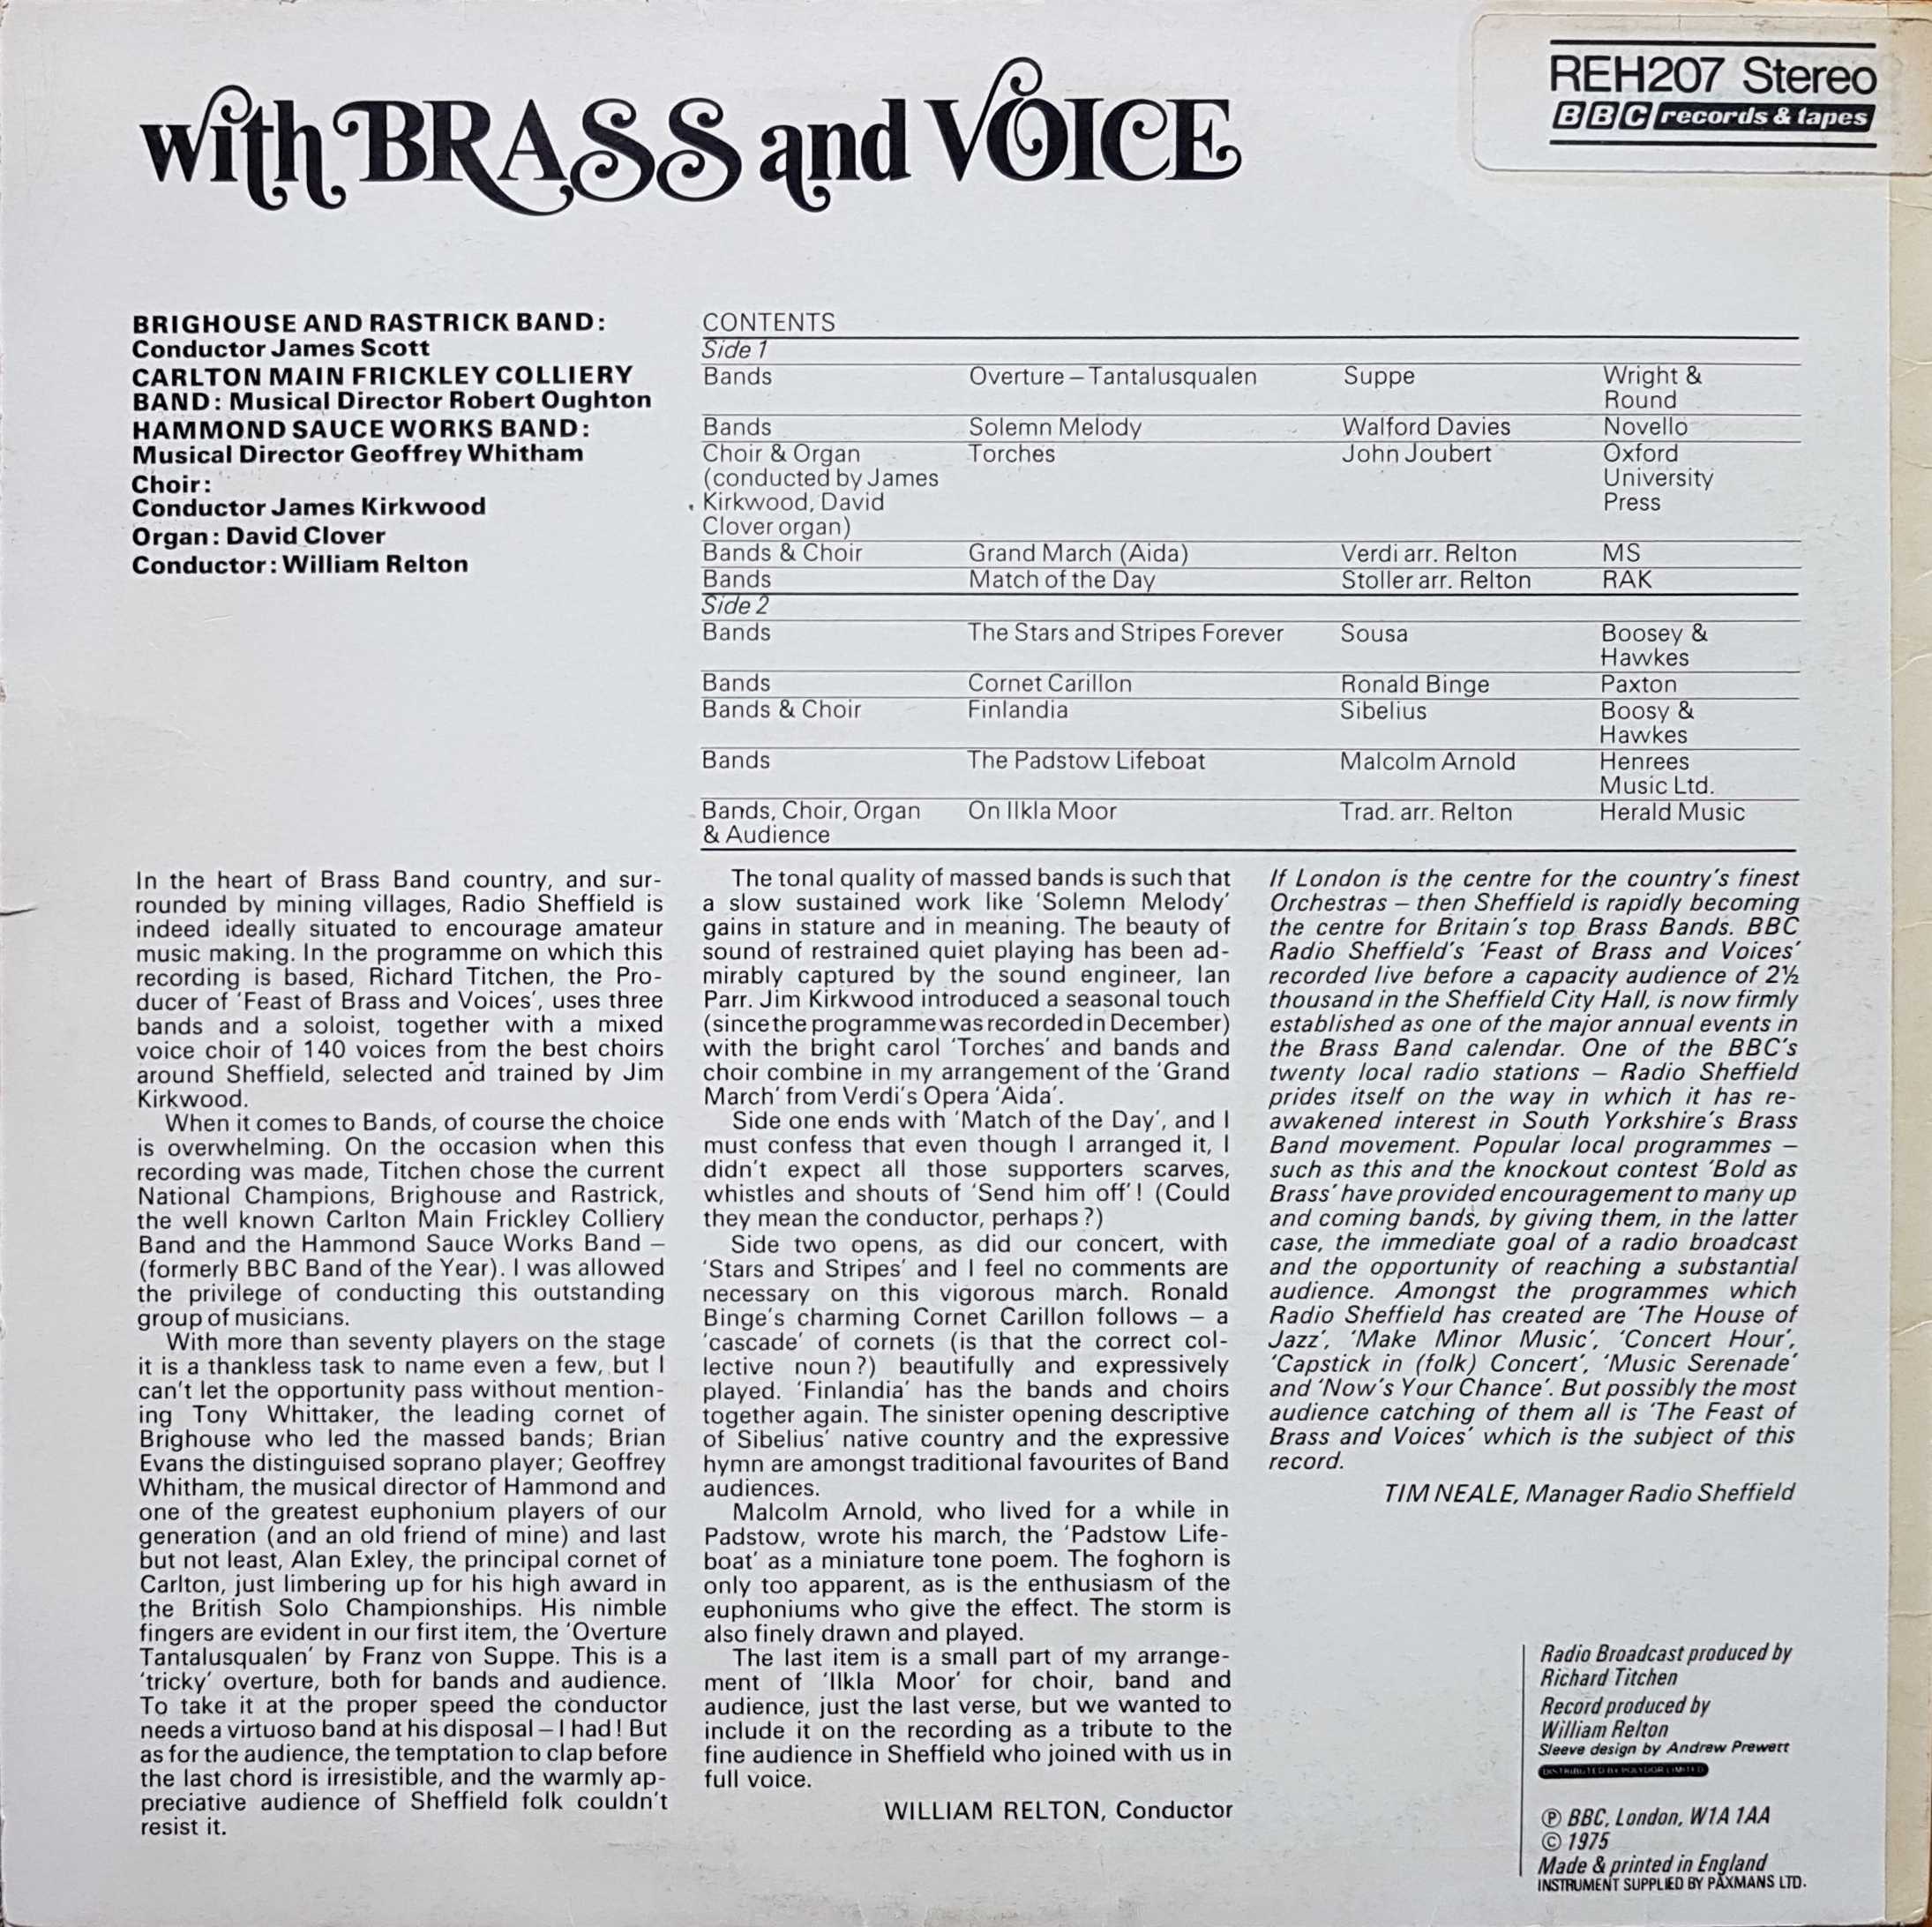 Picture of REH 207 With brass and voice by artist Various from the BBC records and Tapes library